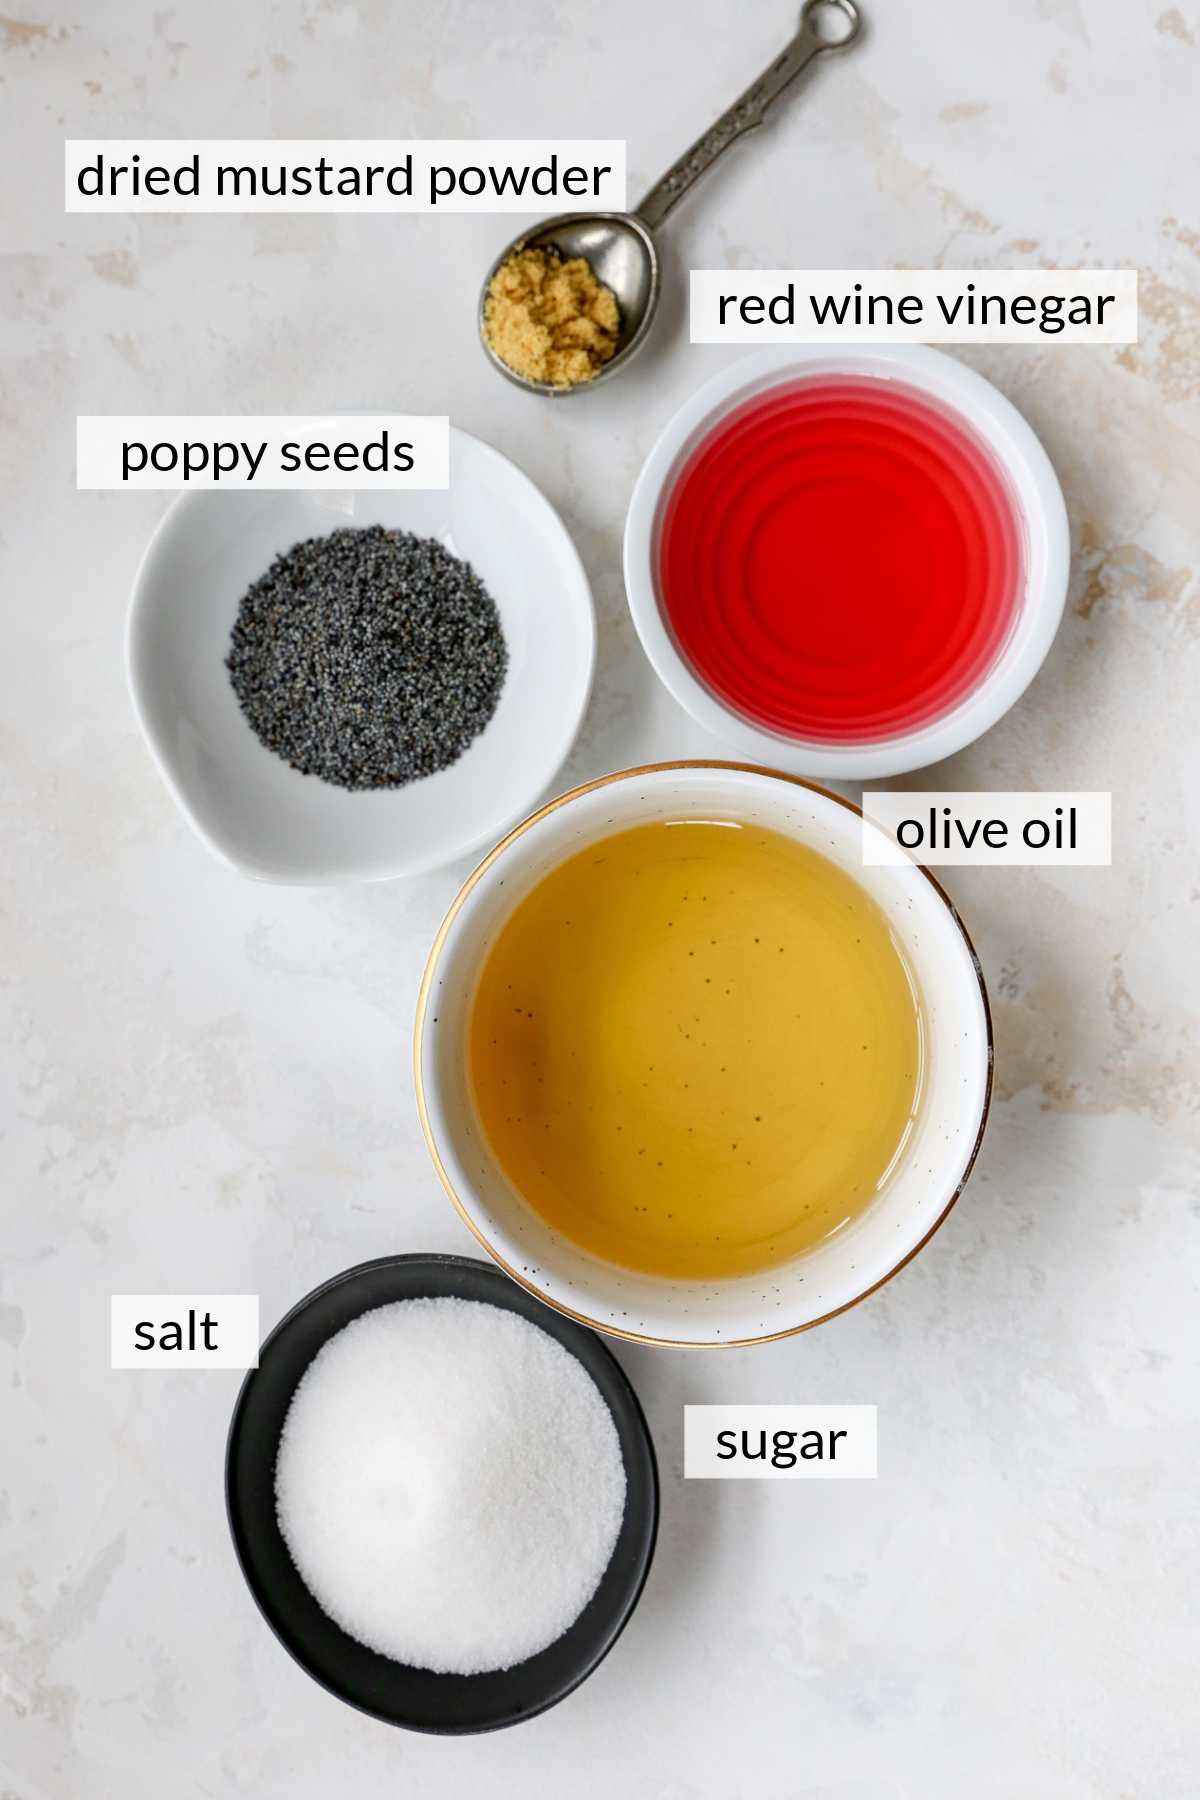 Red wine vinegar, olive oil, sugar, poppy seeds and mustard powder in small bowls.